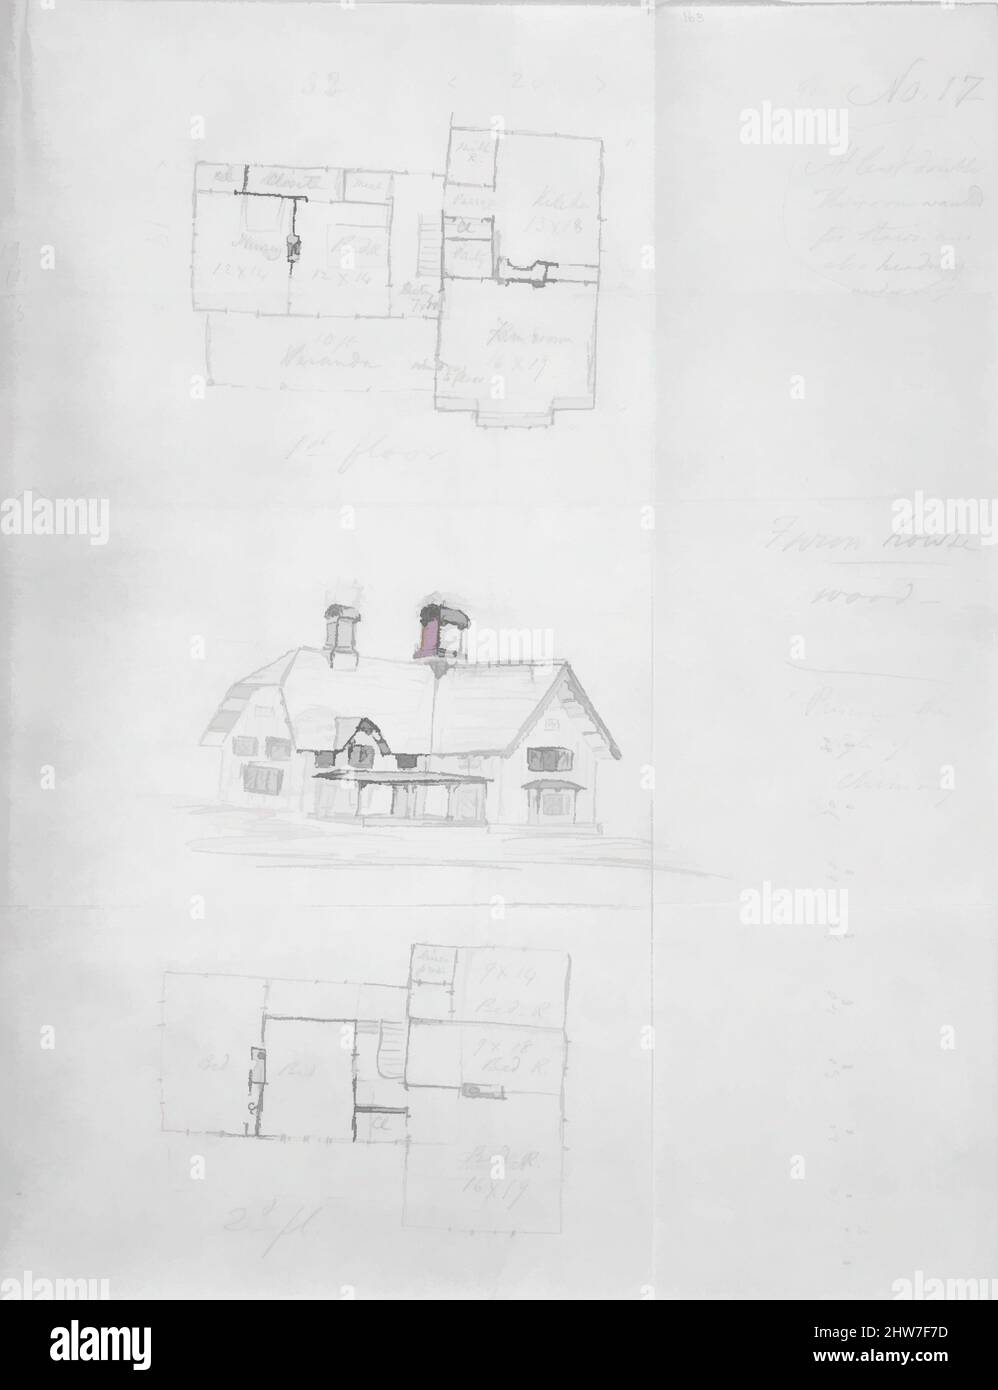 Art inspired by Design for Bracketed American Farm House, Design XVII from The Architecture of Country Houses, ca. 1850, Graphite, sheet: 10 1/16 x 7 15/16 in. (25.5 x 20.1 cm), Alexander Jackson Davis (American, New York 1803–1892 West Orange, New Jersey, Classic works modernized by Artotop with a splash of modernity. Shapes, color and value, eye-catching visual impact on art. Emotions through freedom of artworks in a contemporary way. A timeless message pursuing a wildly creative new direction. Artists turning to the digital medium and creating the Artotop NFT Stock Photo